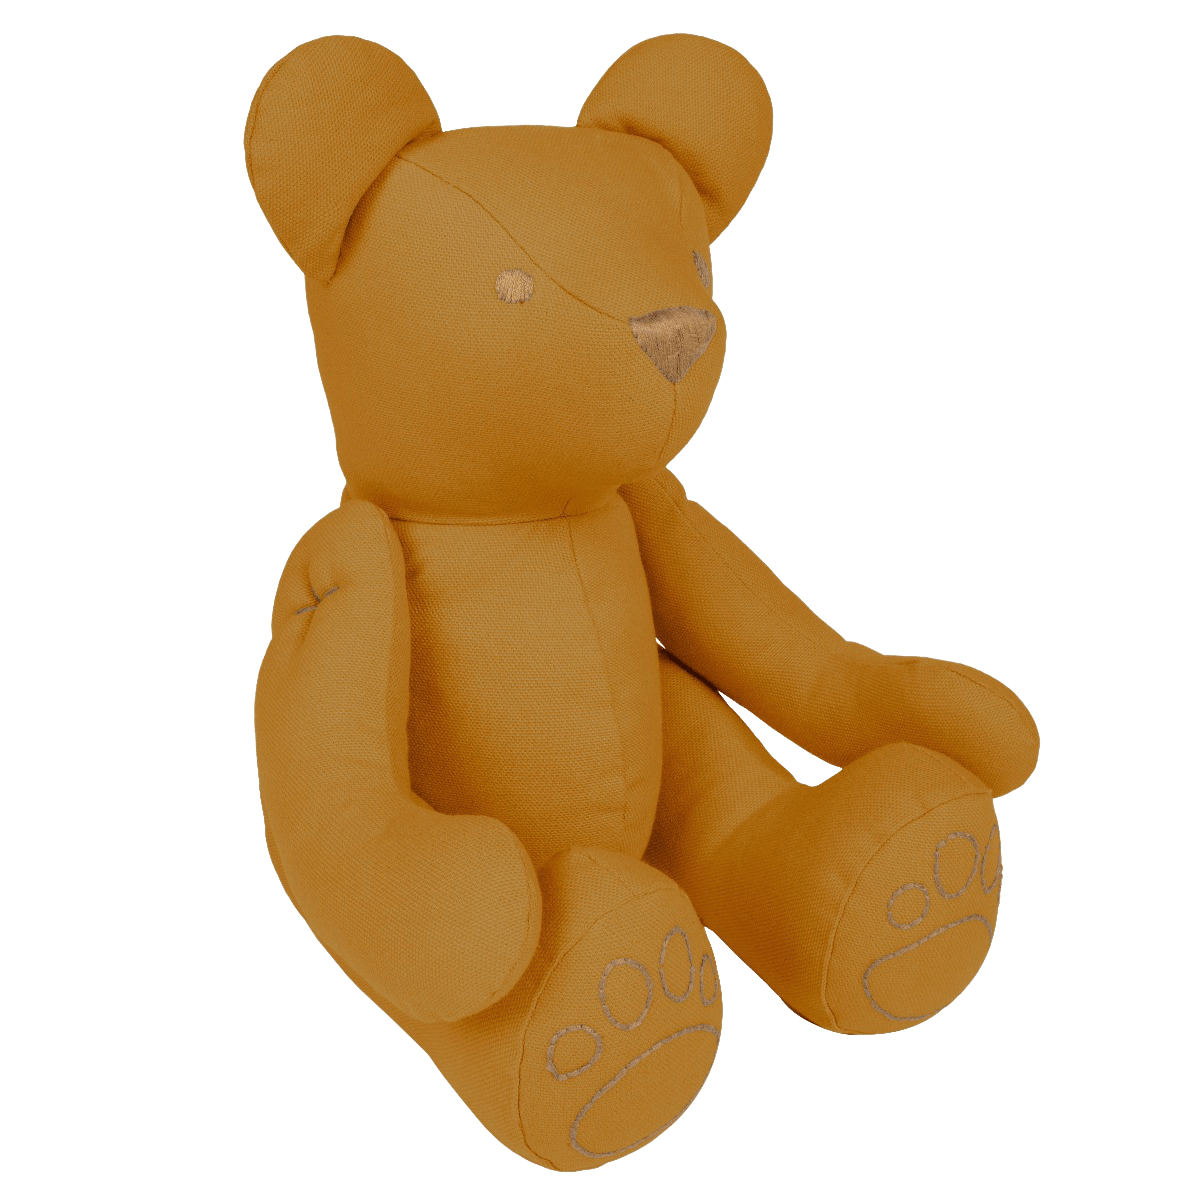 Ted Bear Small Gold